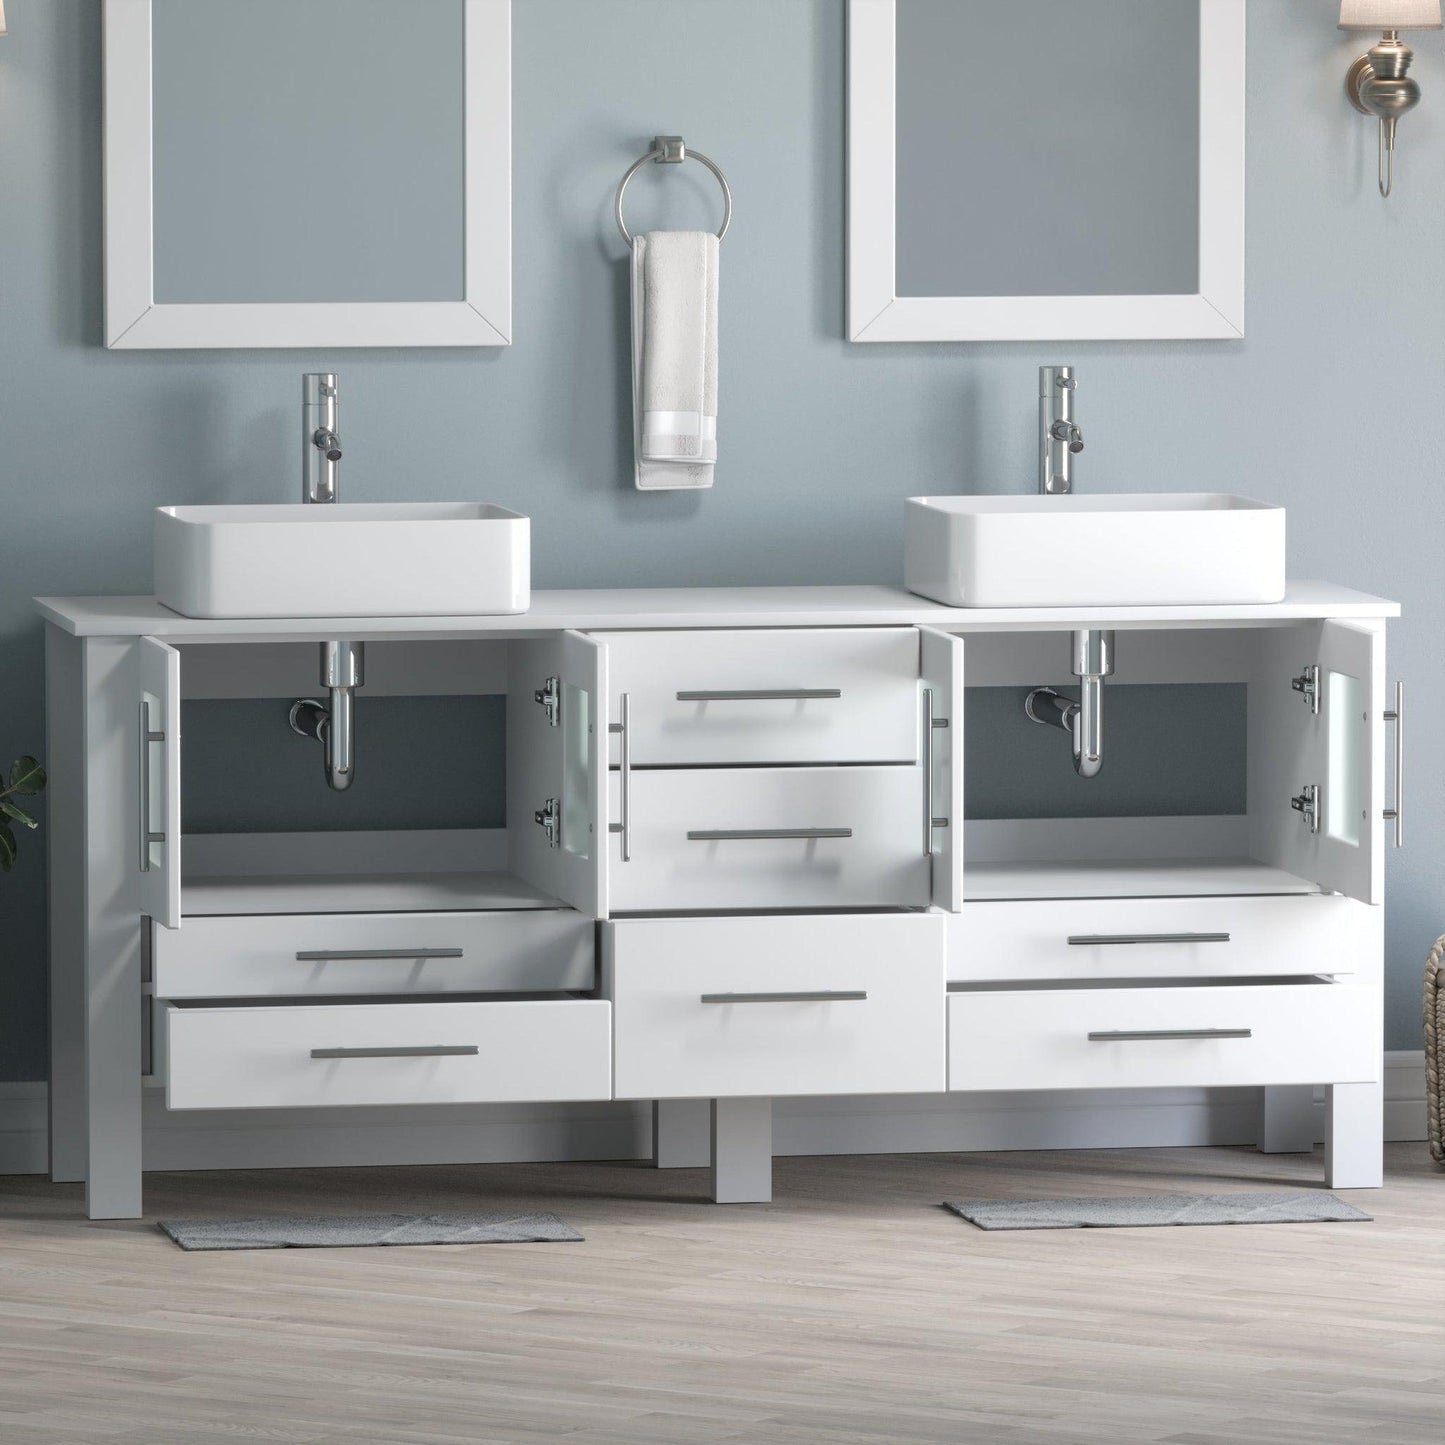 Cambridge Plumbing 72" White Wood Double Vanity Set With Porcelain Countertop And Rectangular Vessel Sink With Polished Chrome Plumbing Finish